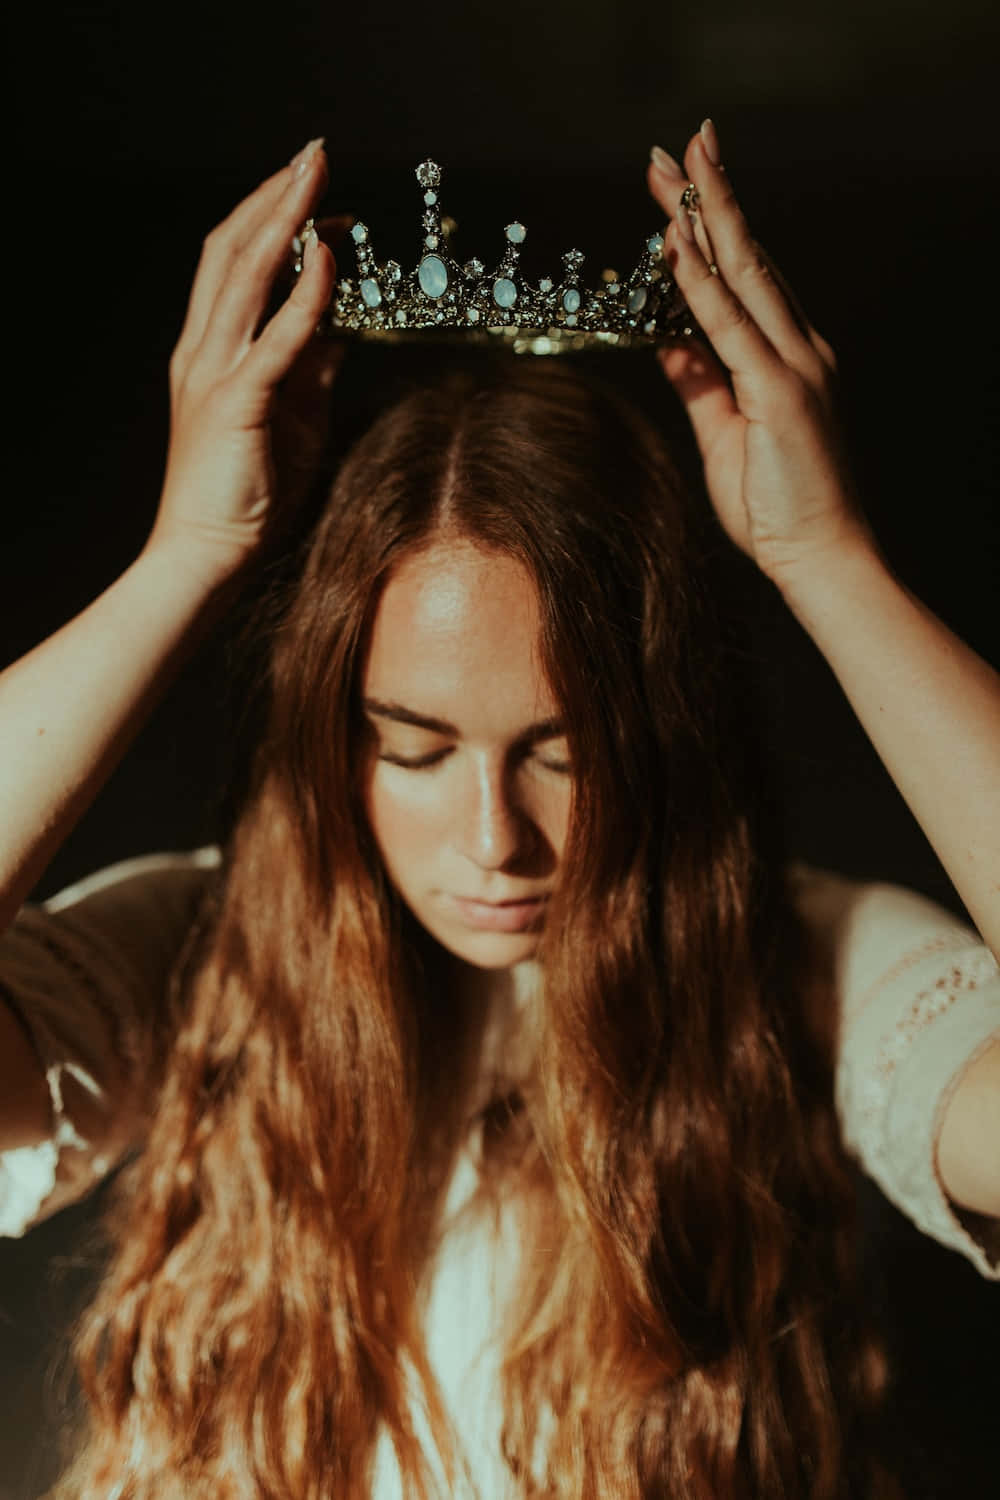 A Woman With Long Hair Wearing A Crown